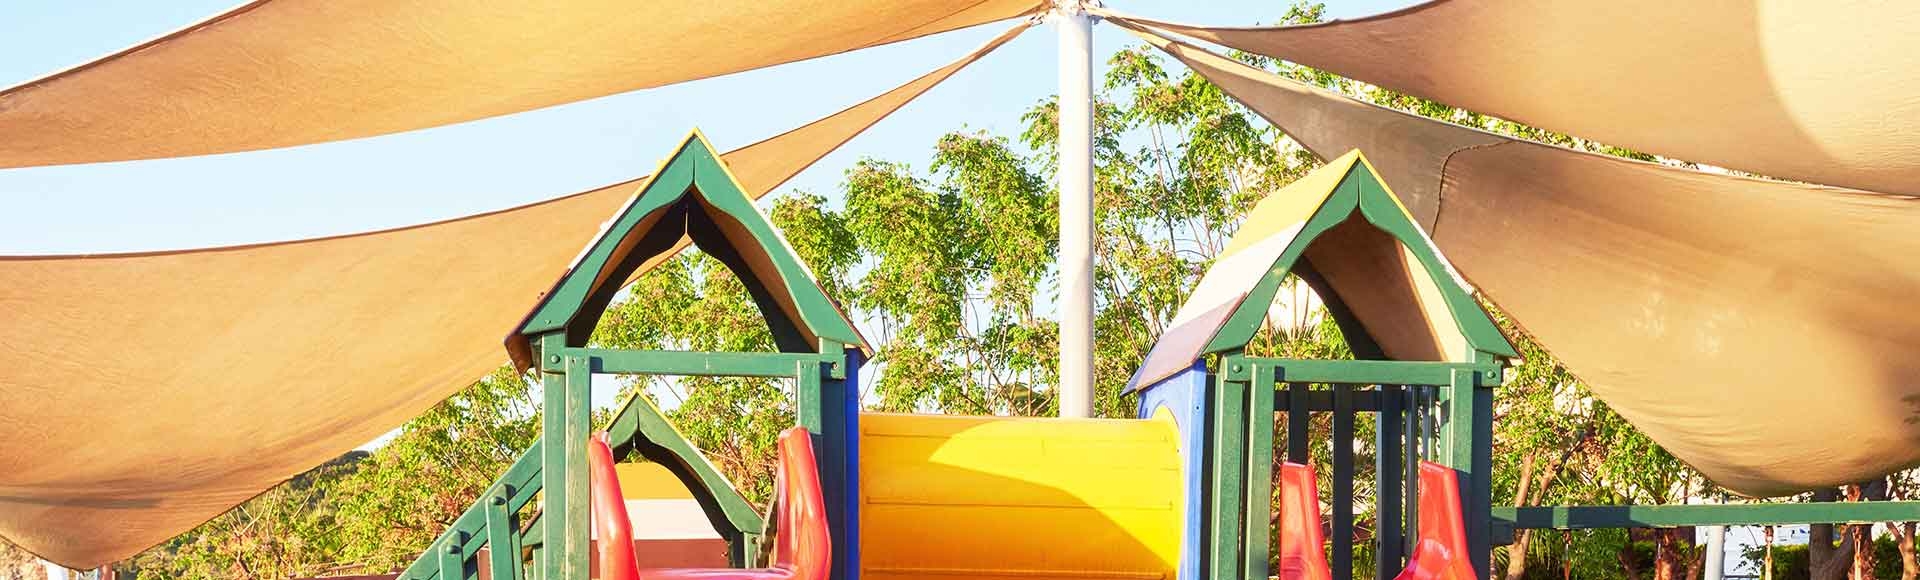 Keeping Your Child Safe In Public Playgrounds